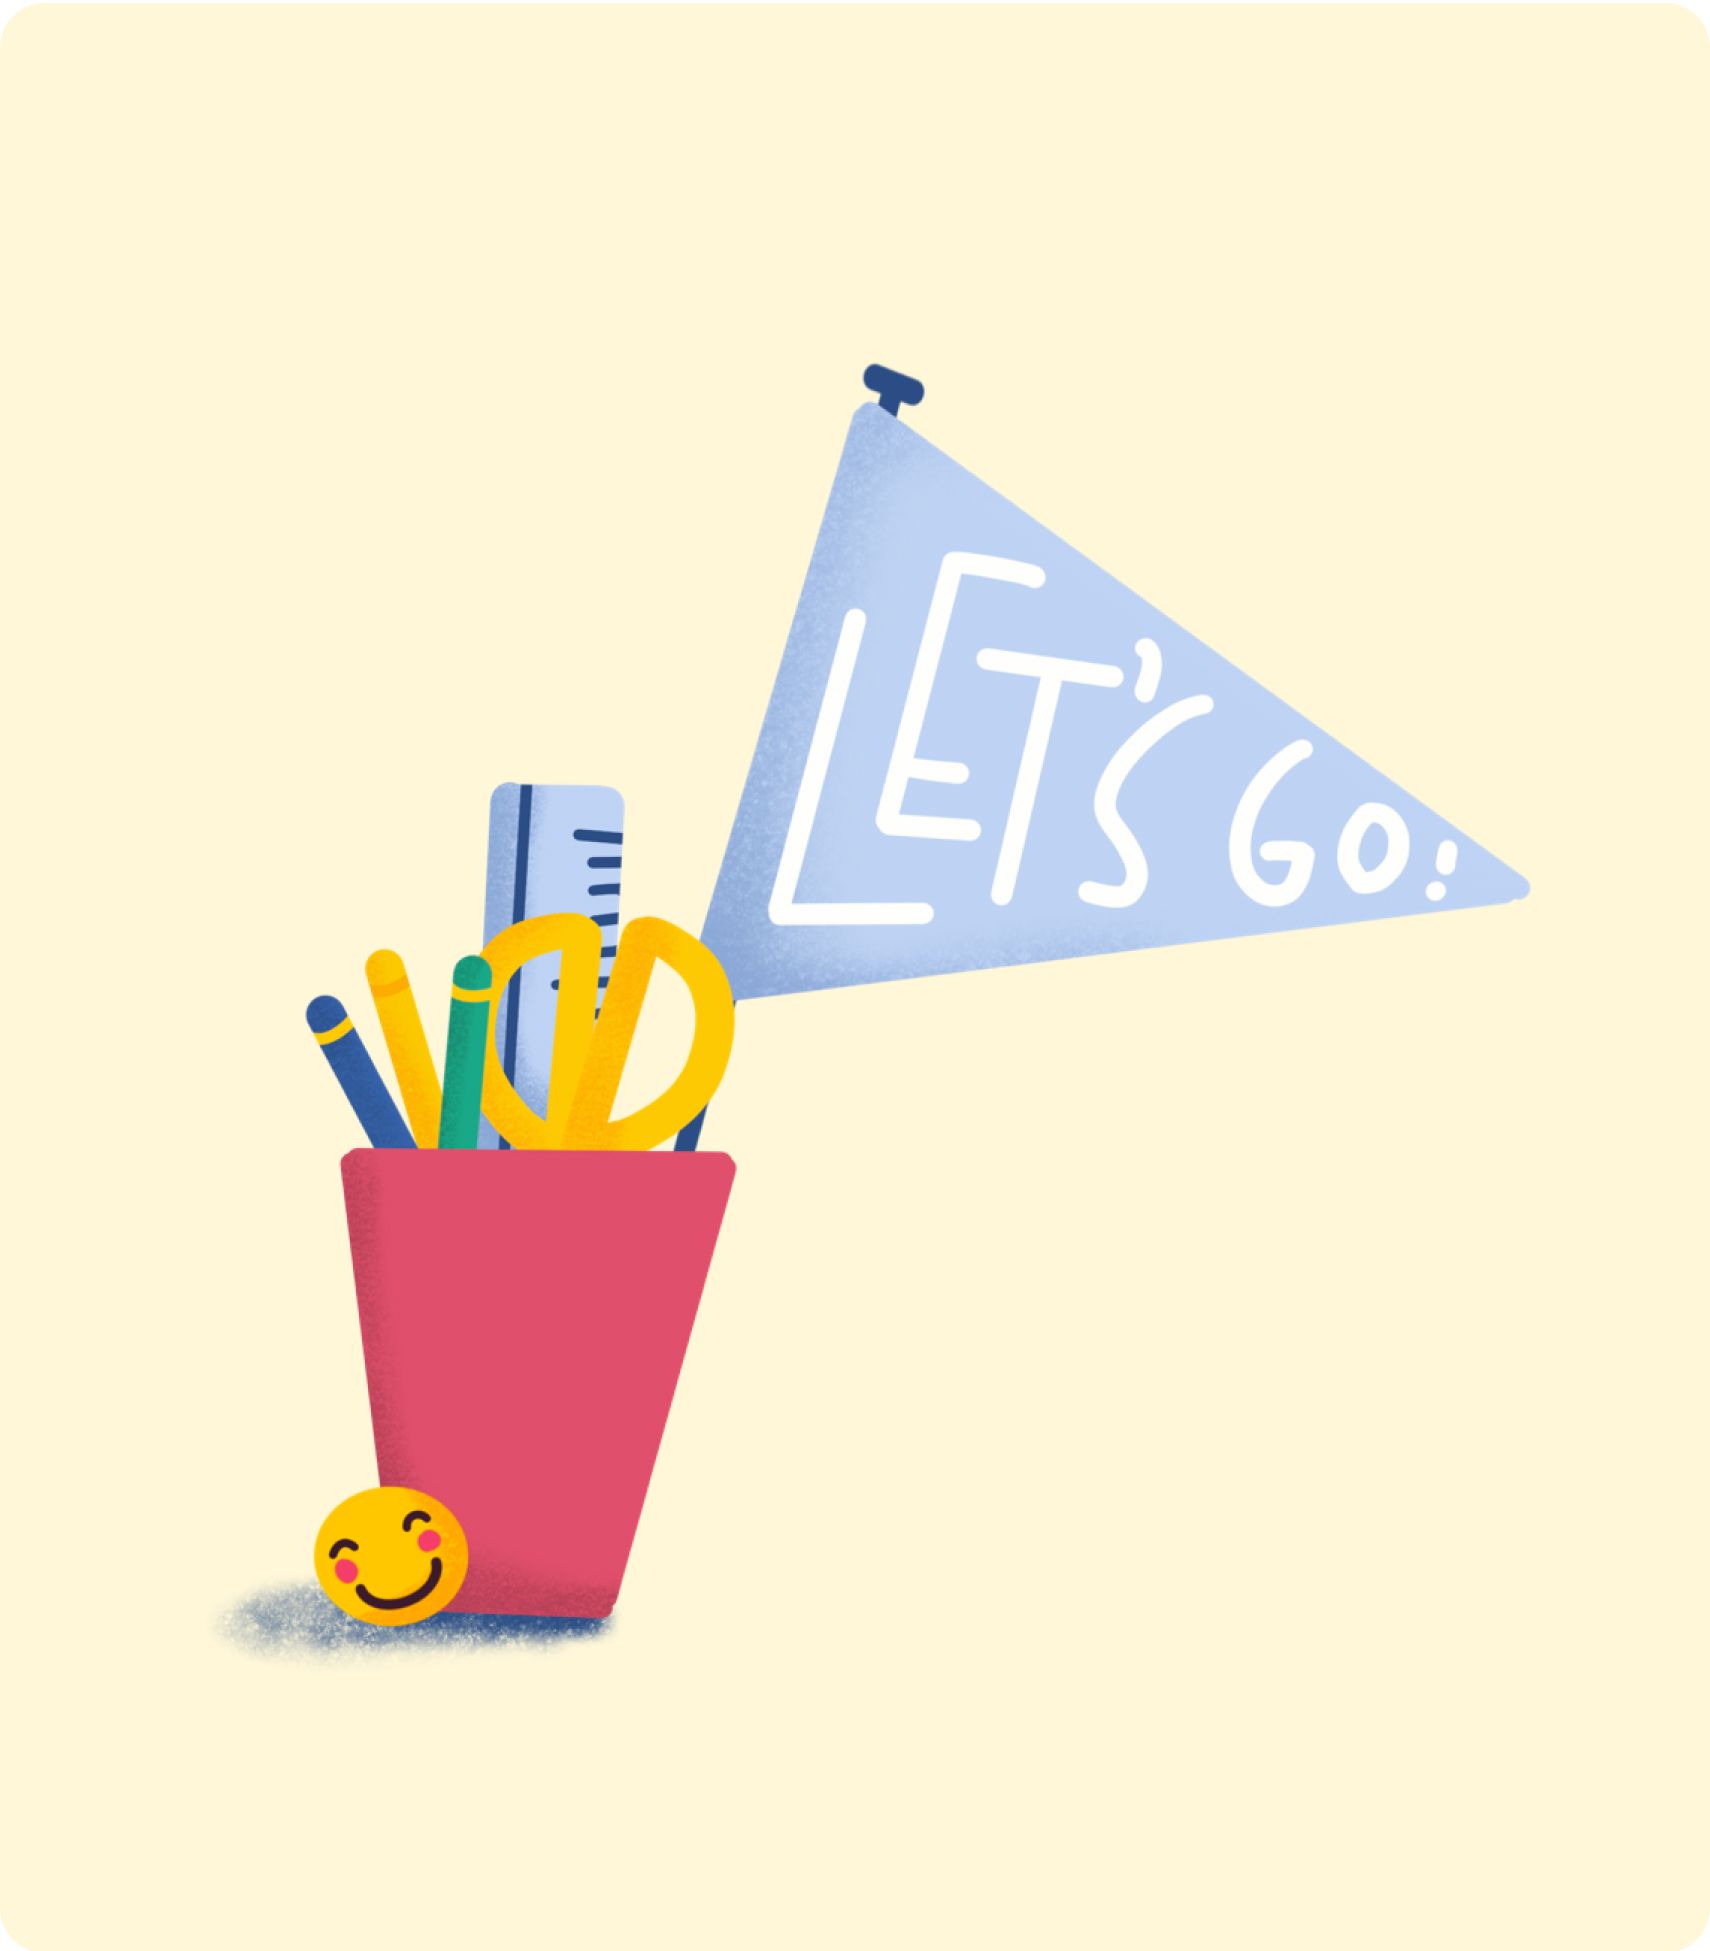 Illustration of a cup with pens, a ruler, scissors and small flag with "Let's go".